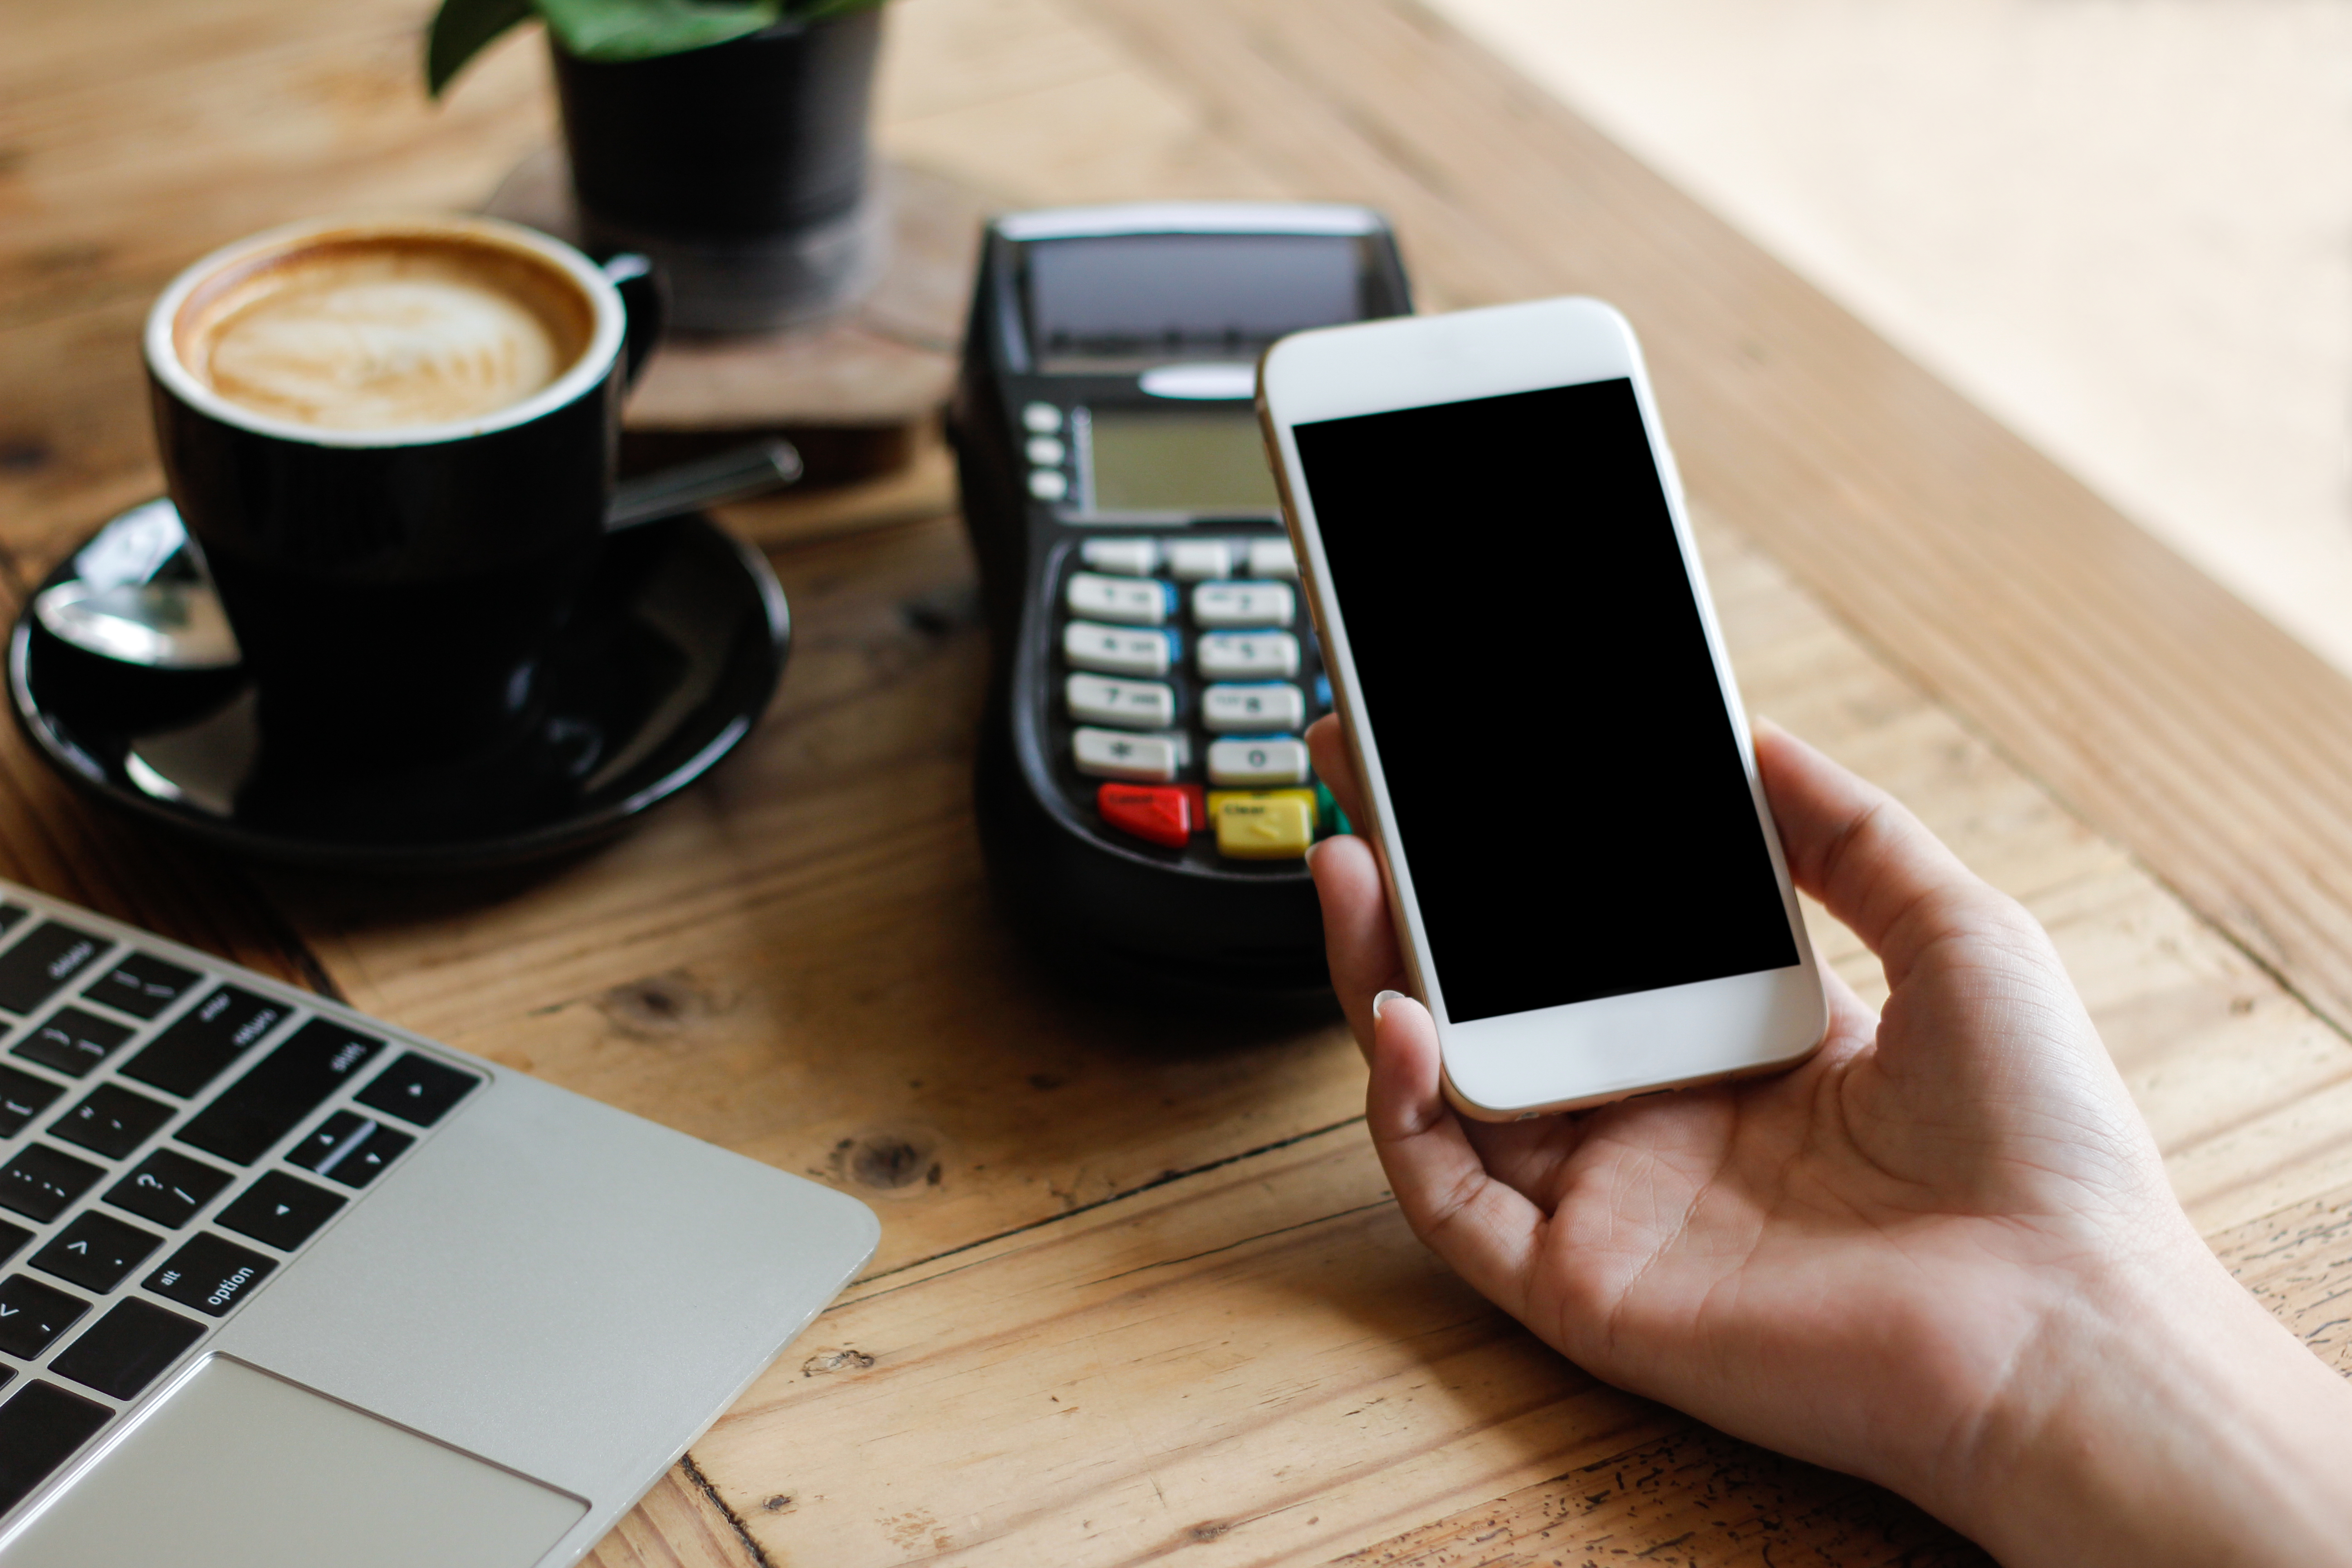 Blank,Phone,Payment,By,Nfc,Technology,In,Coffee,Shop